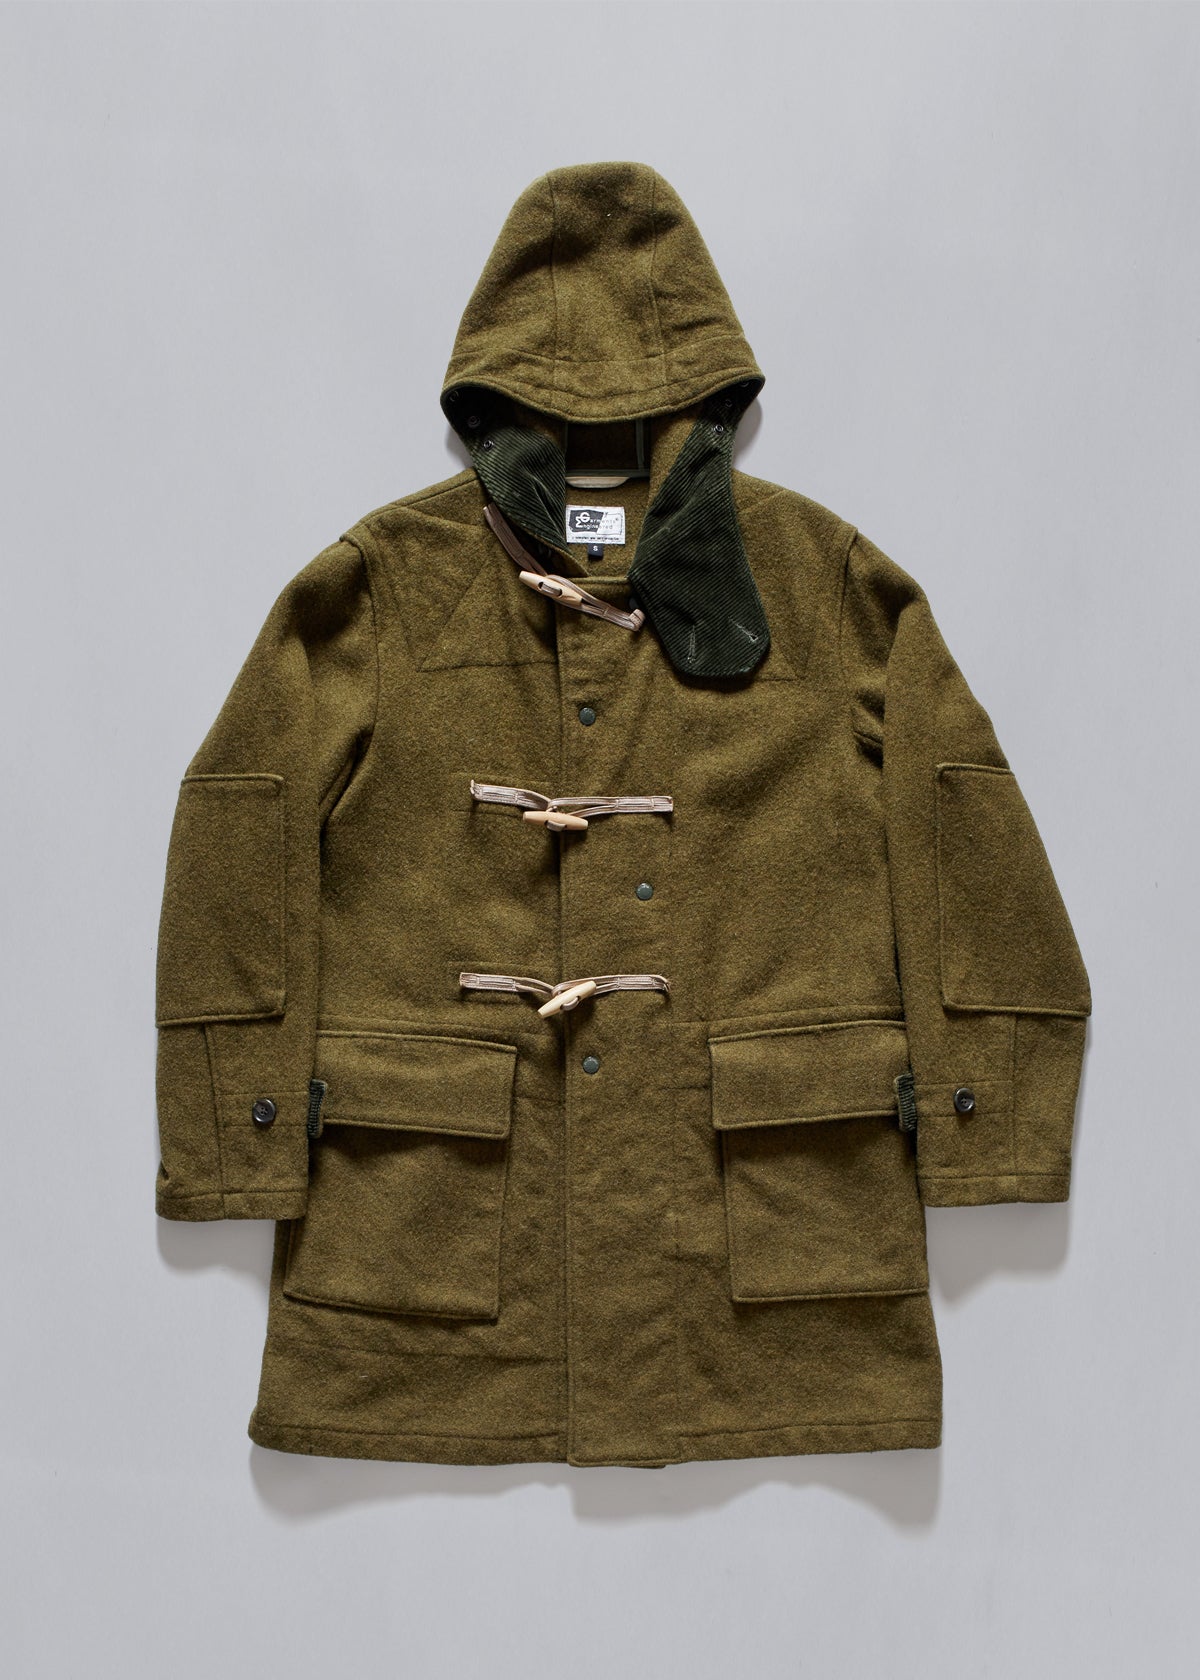 Melton Wool Duffle Coat AW2011 - Small - The Archivist Store